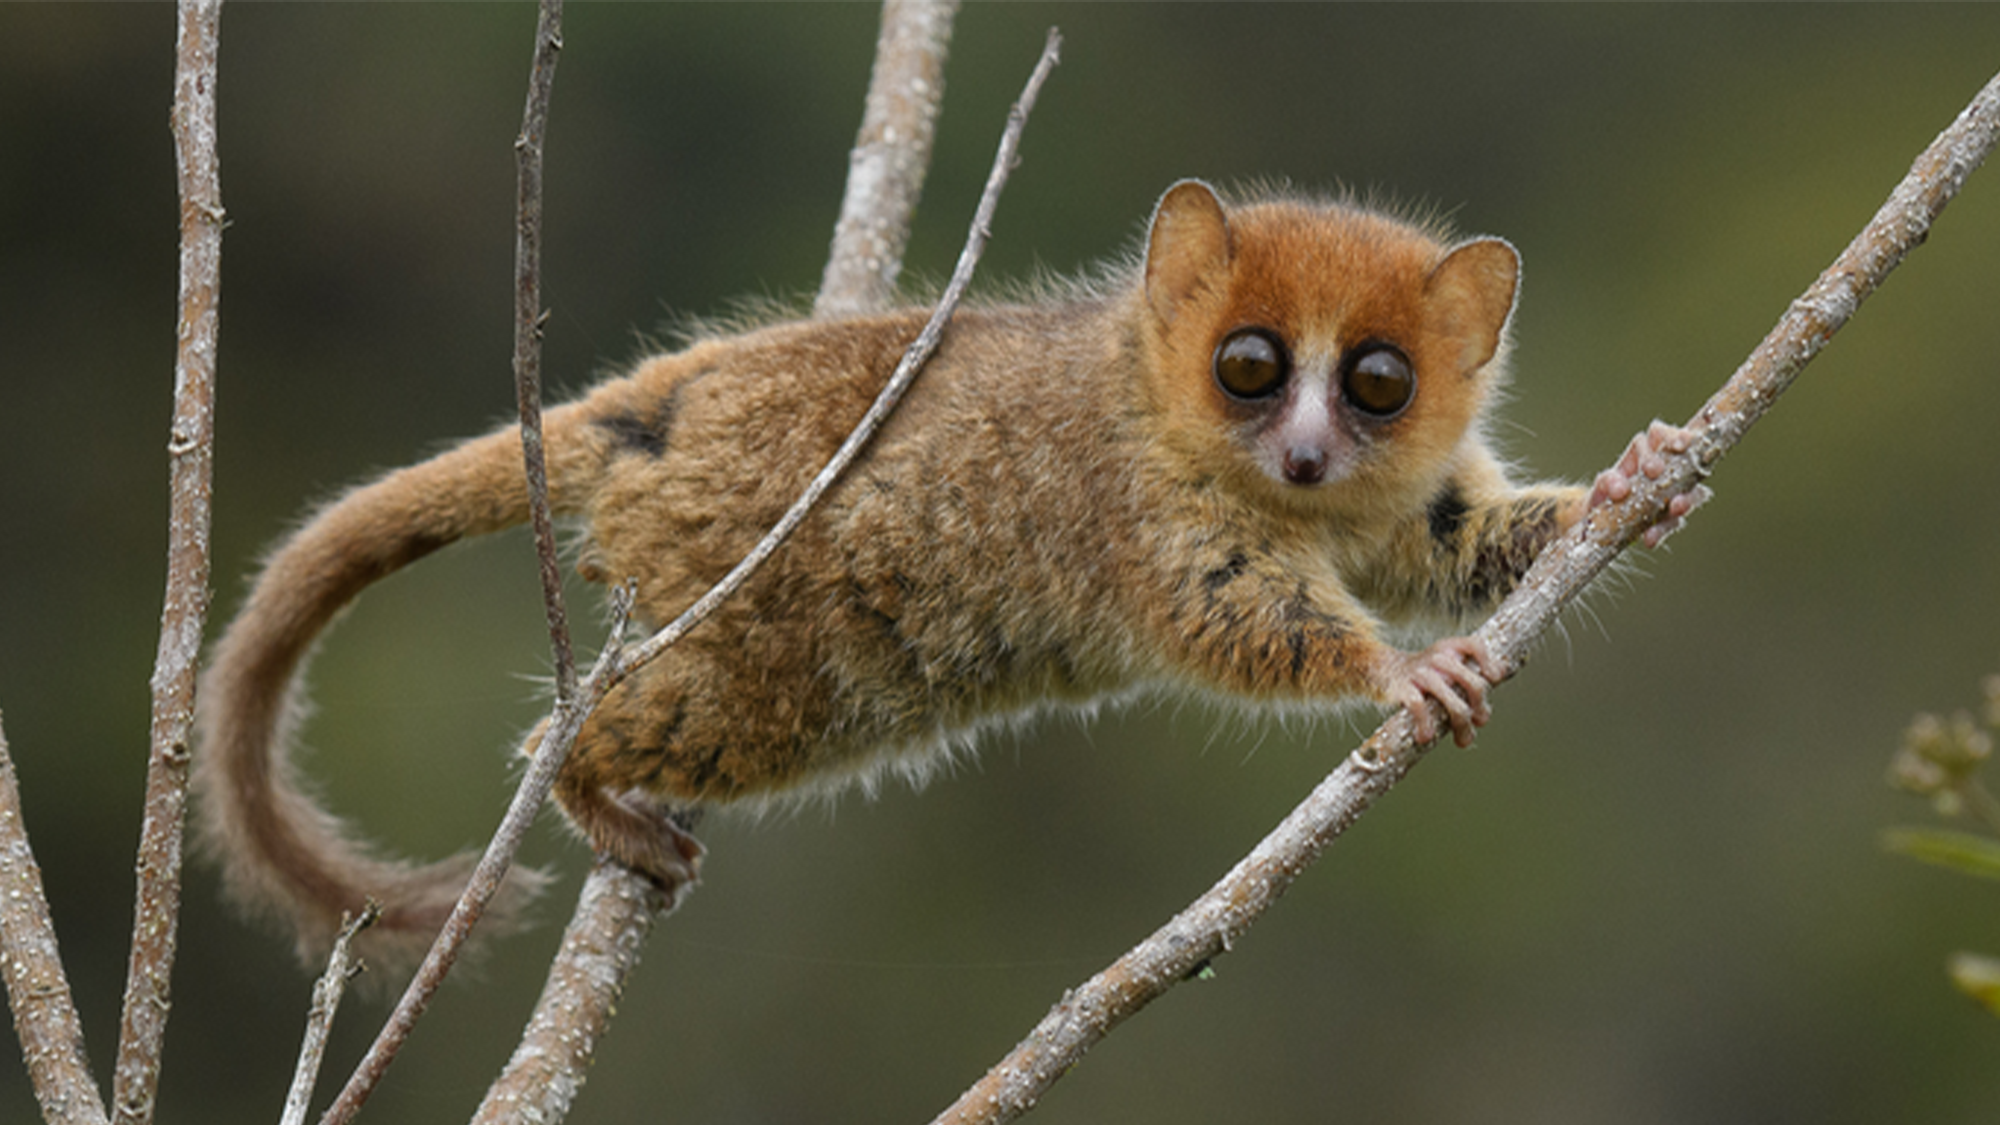 A big-eyed Brown Mouse Lemur from Madagascar.